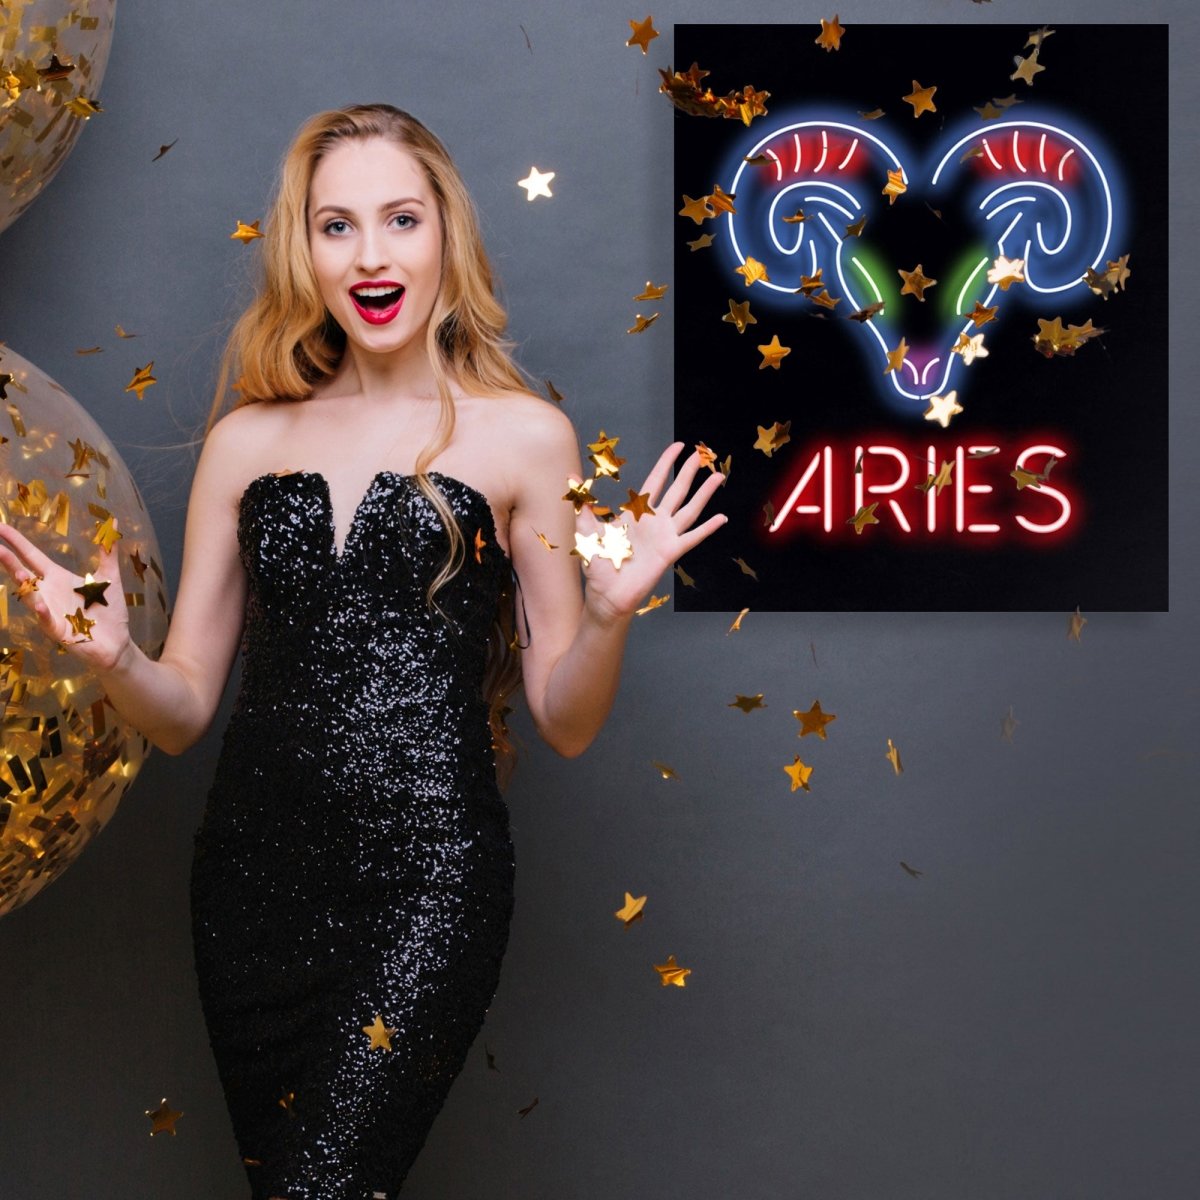 Personalised LED Neon Sign ARIES - madaboutneon